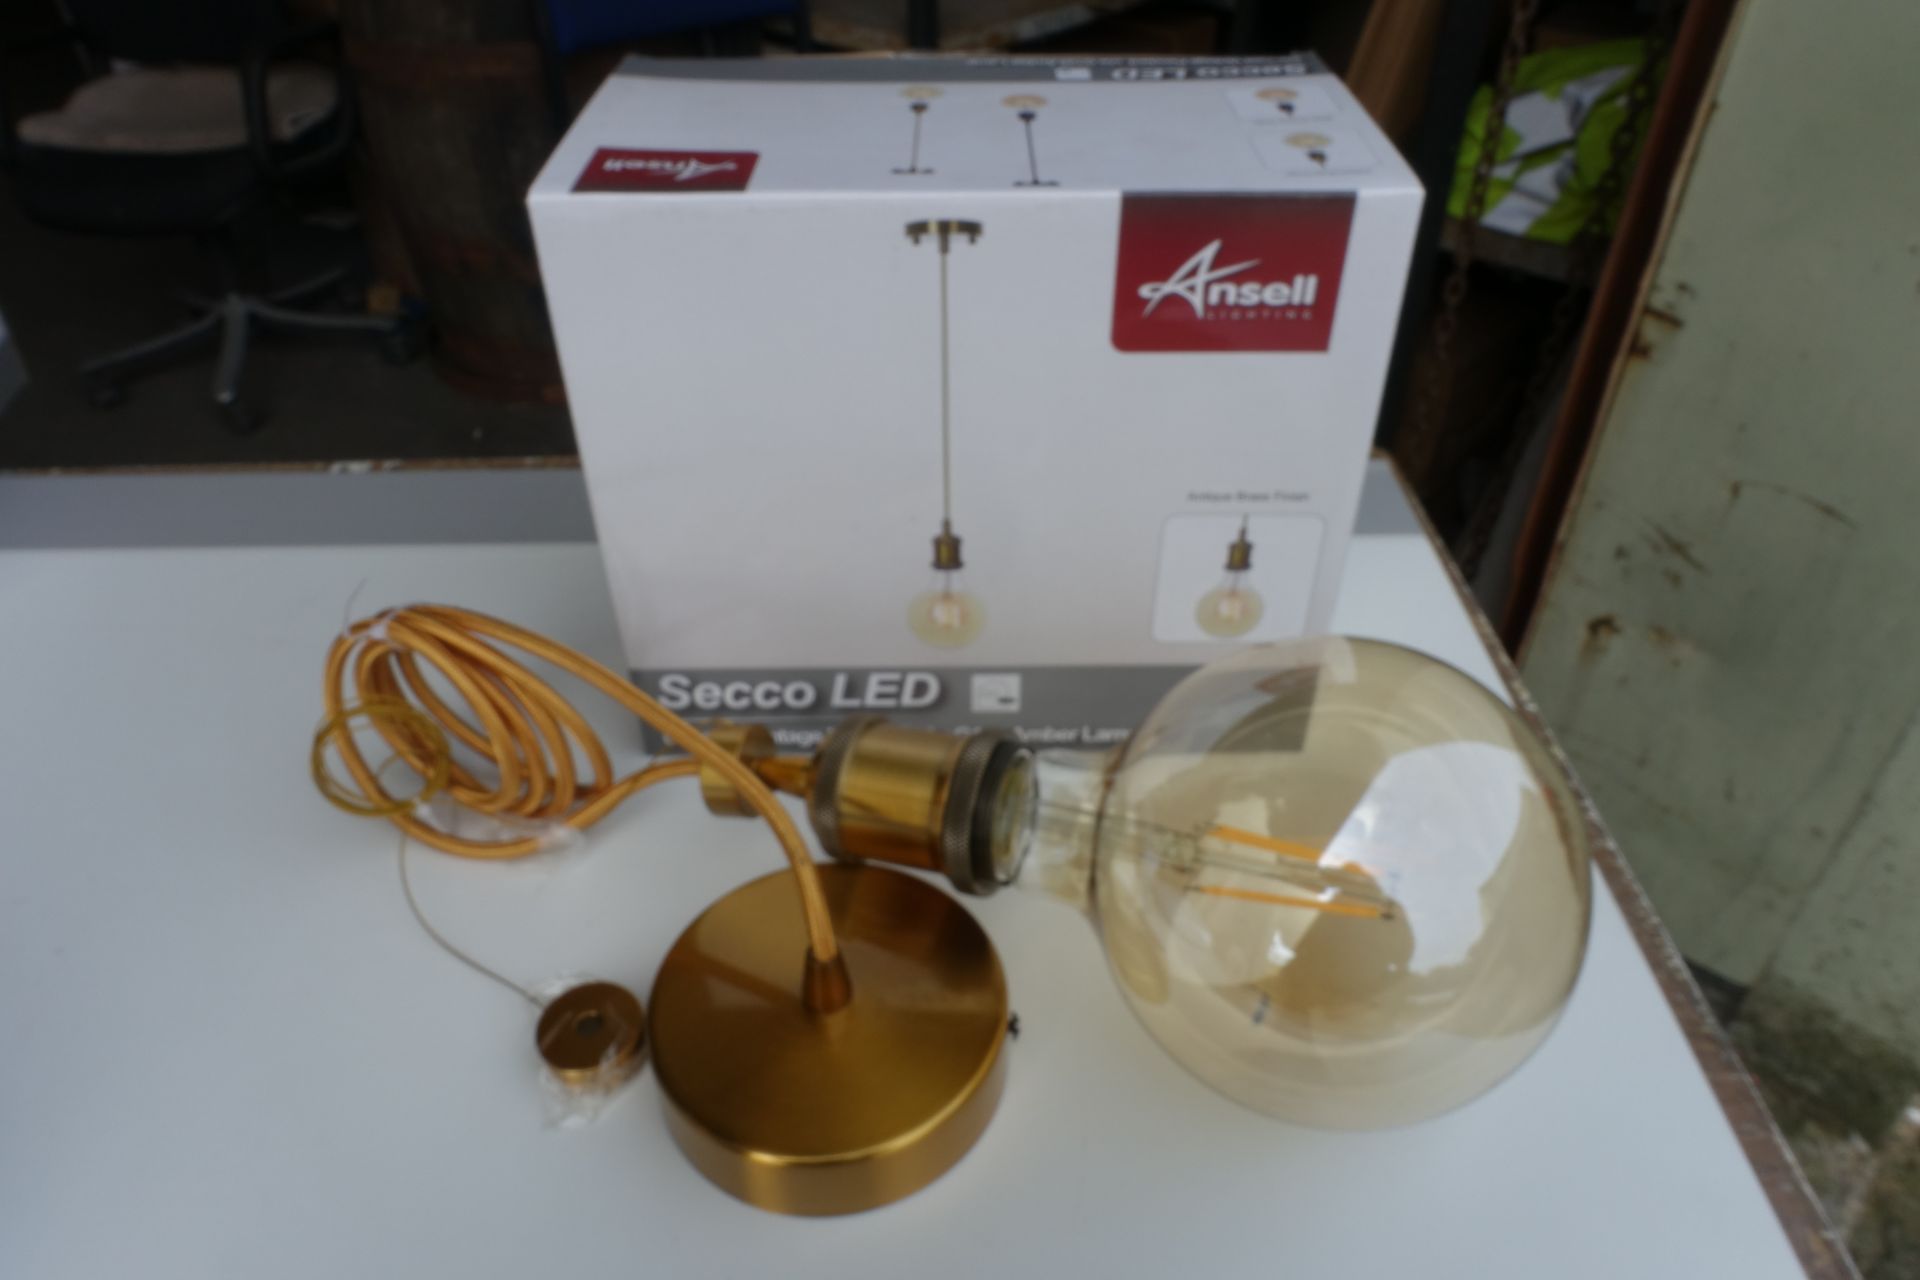 16 x ANSELL AEC/G125/AB SECCO LED Die-Cast Vintage Pendant Fitting with G125 Amber Lamp